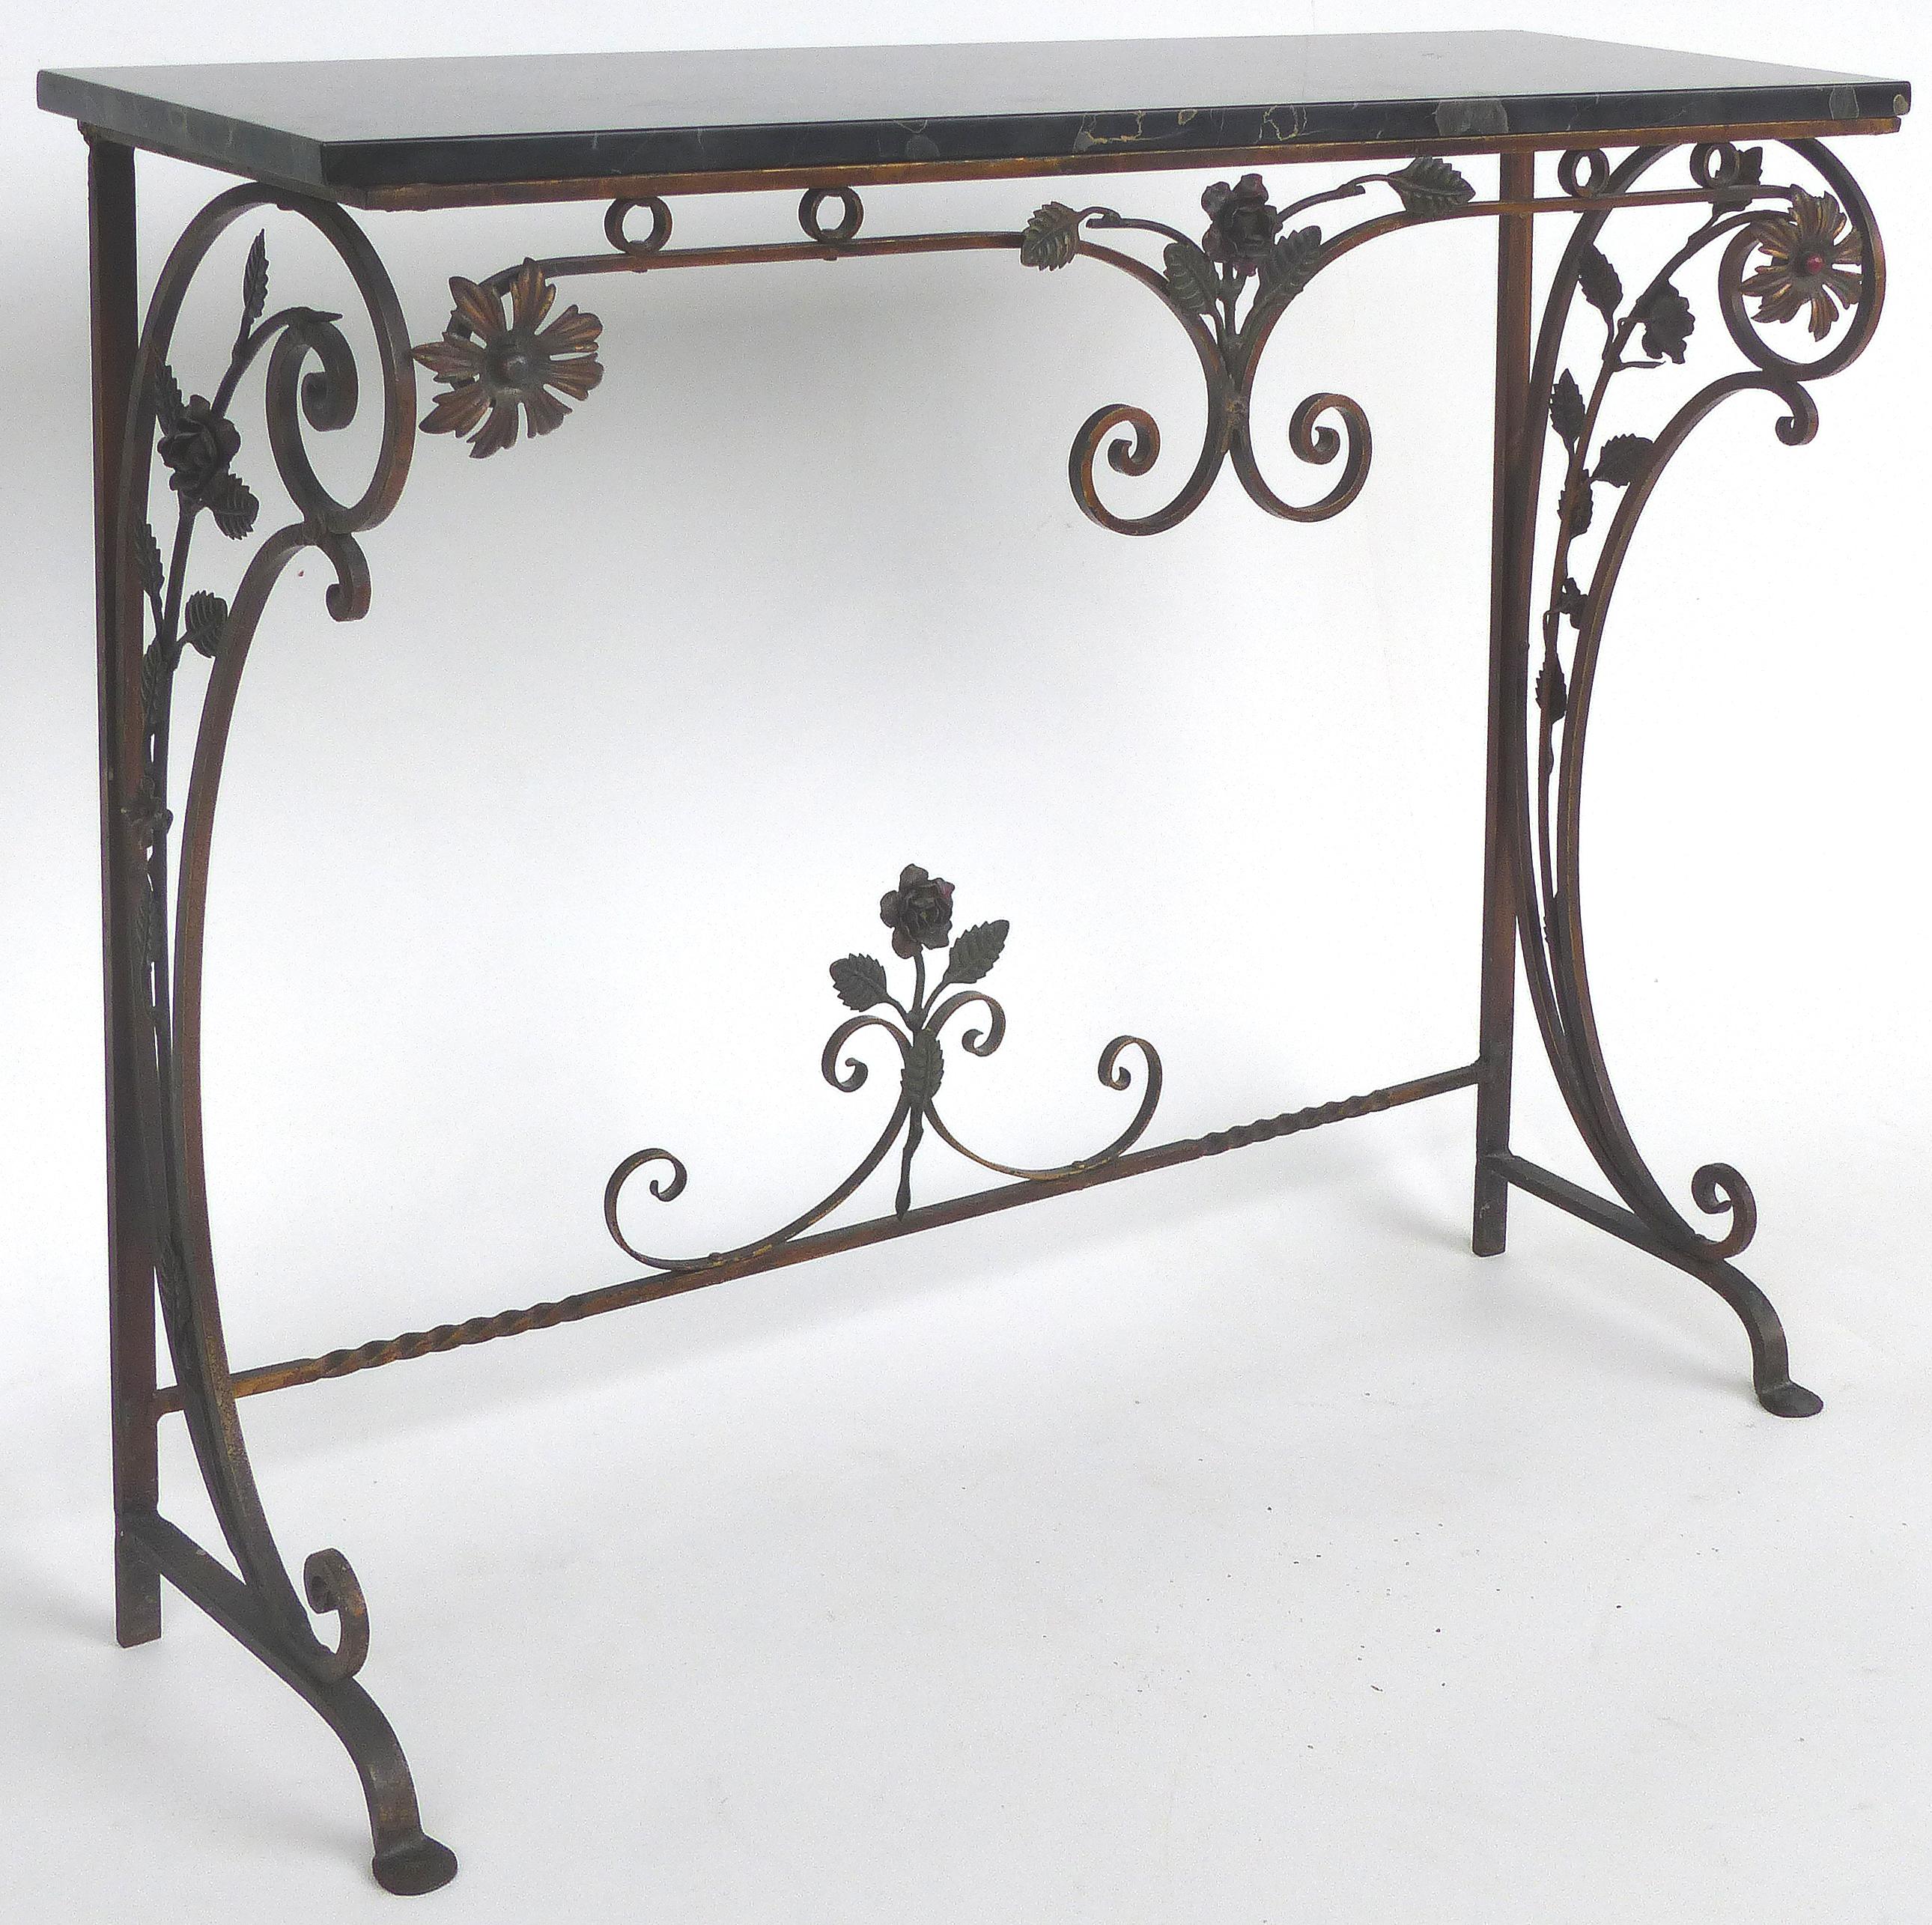 Italian Art Deco Gilt Iron, Polychromed Marble Top Console with Matching Mirror

Offered for sale is a gilt iron polychromed marble top console with matching mirror. The painted iron has a lovely aged patina. Measurements: console is 36